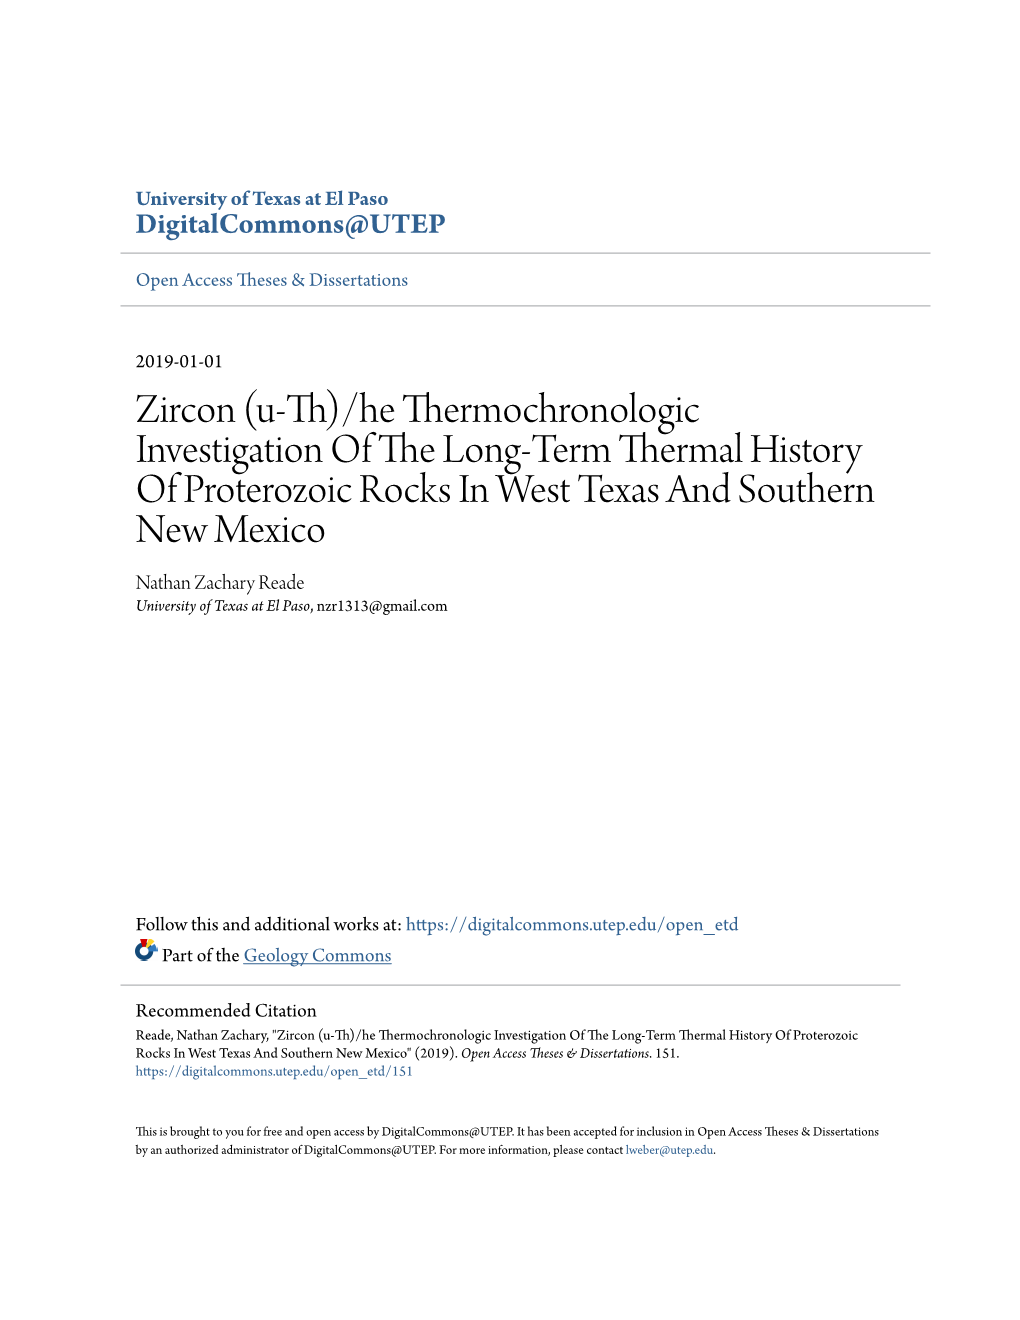 He Thermochronologic Investigation of the Long-Term Thermal History